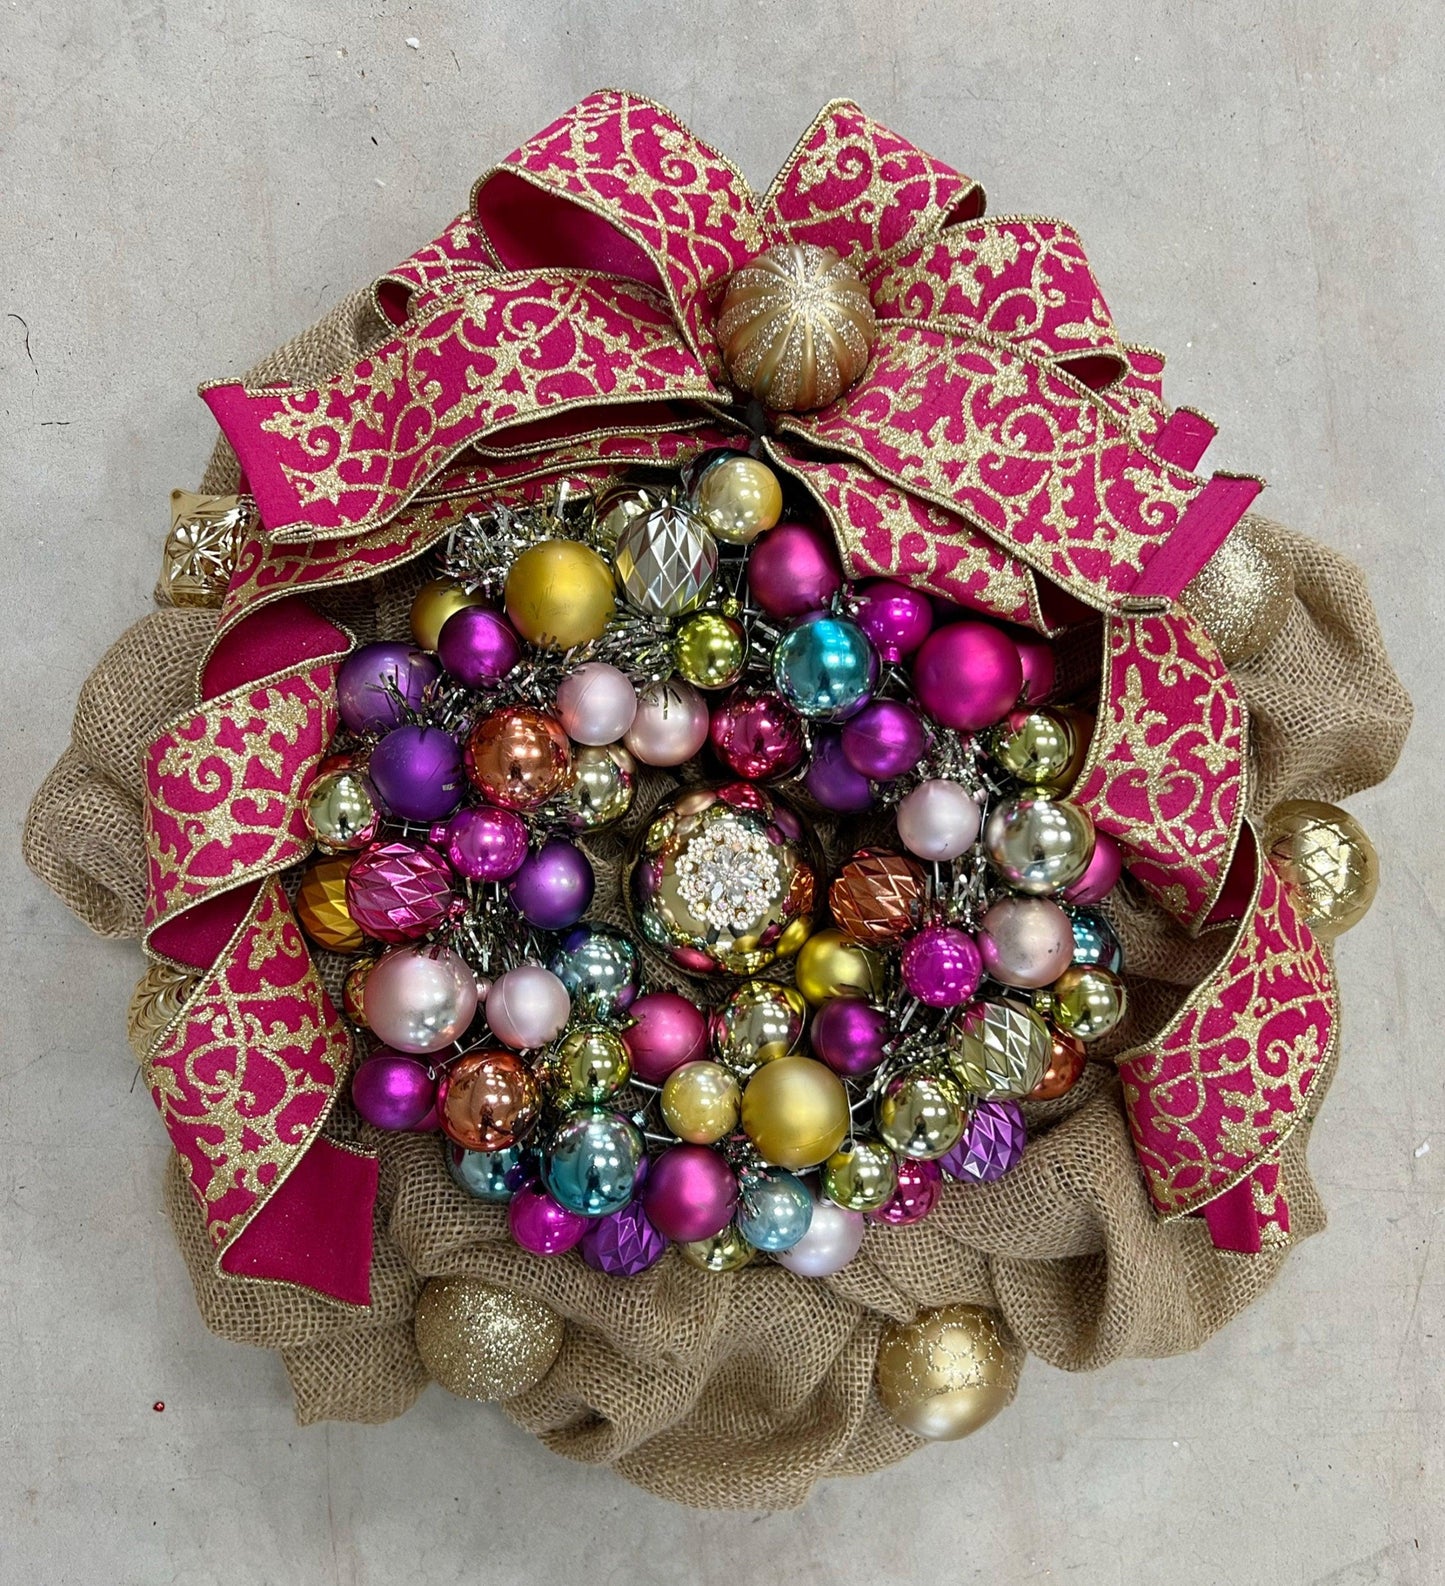 Christmas Wreath, Burlap Christmas Wreath - Burlap and Bling Decor